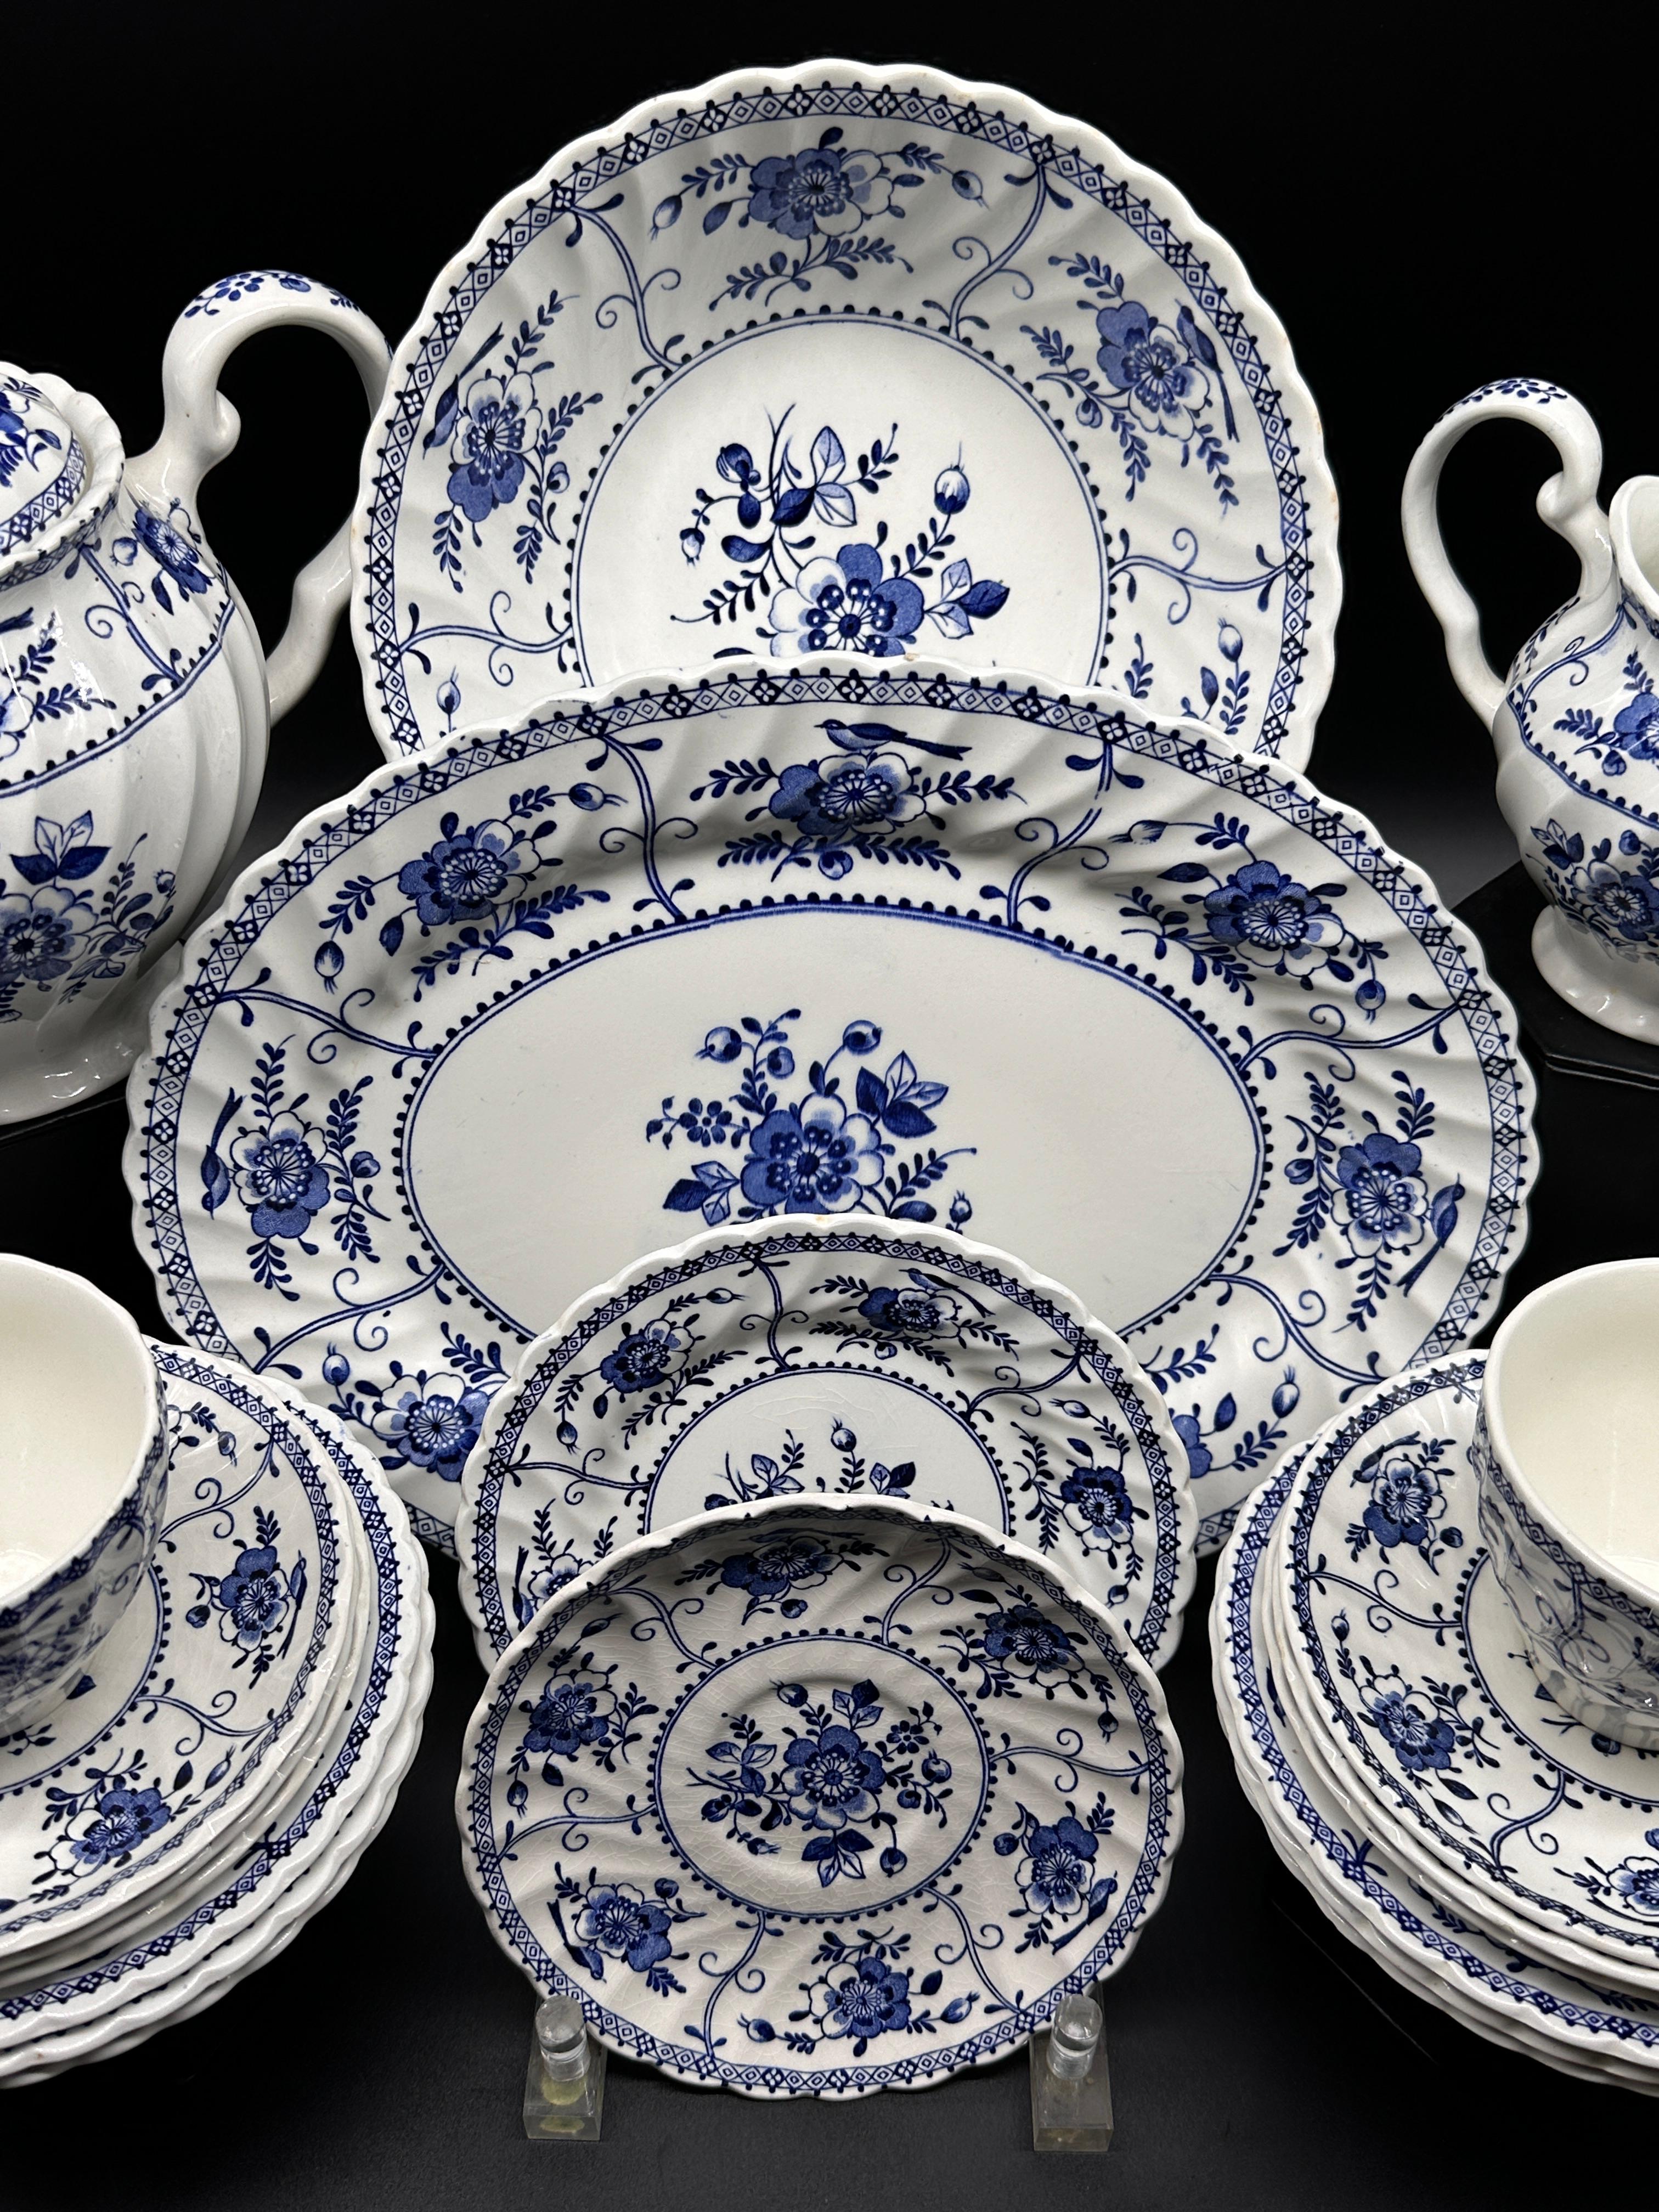 Collection of INDIES Dishes-Made in England by Johnson Bros